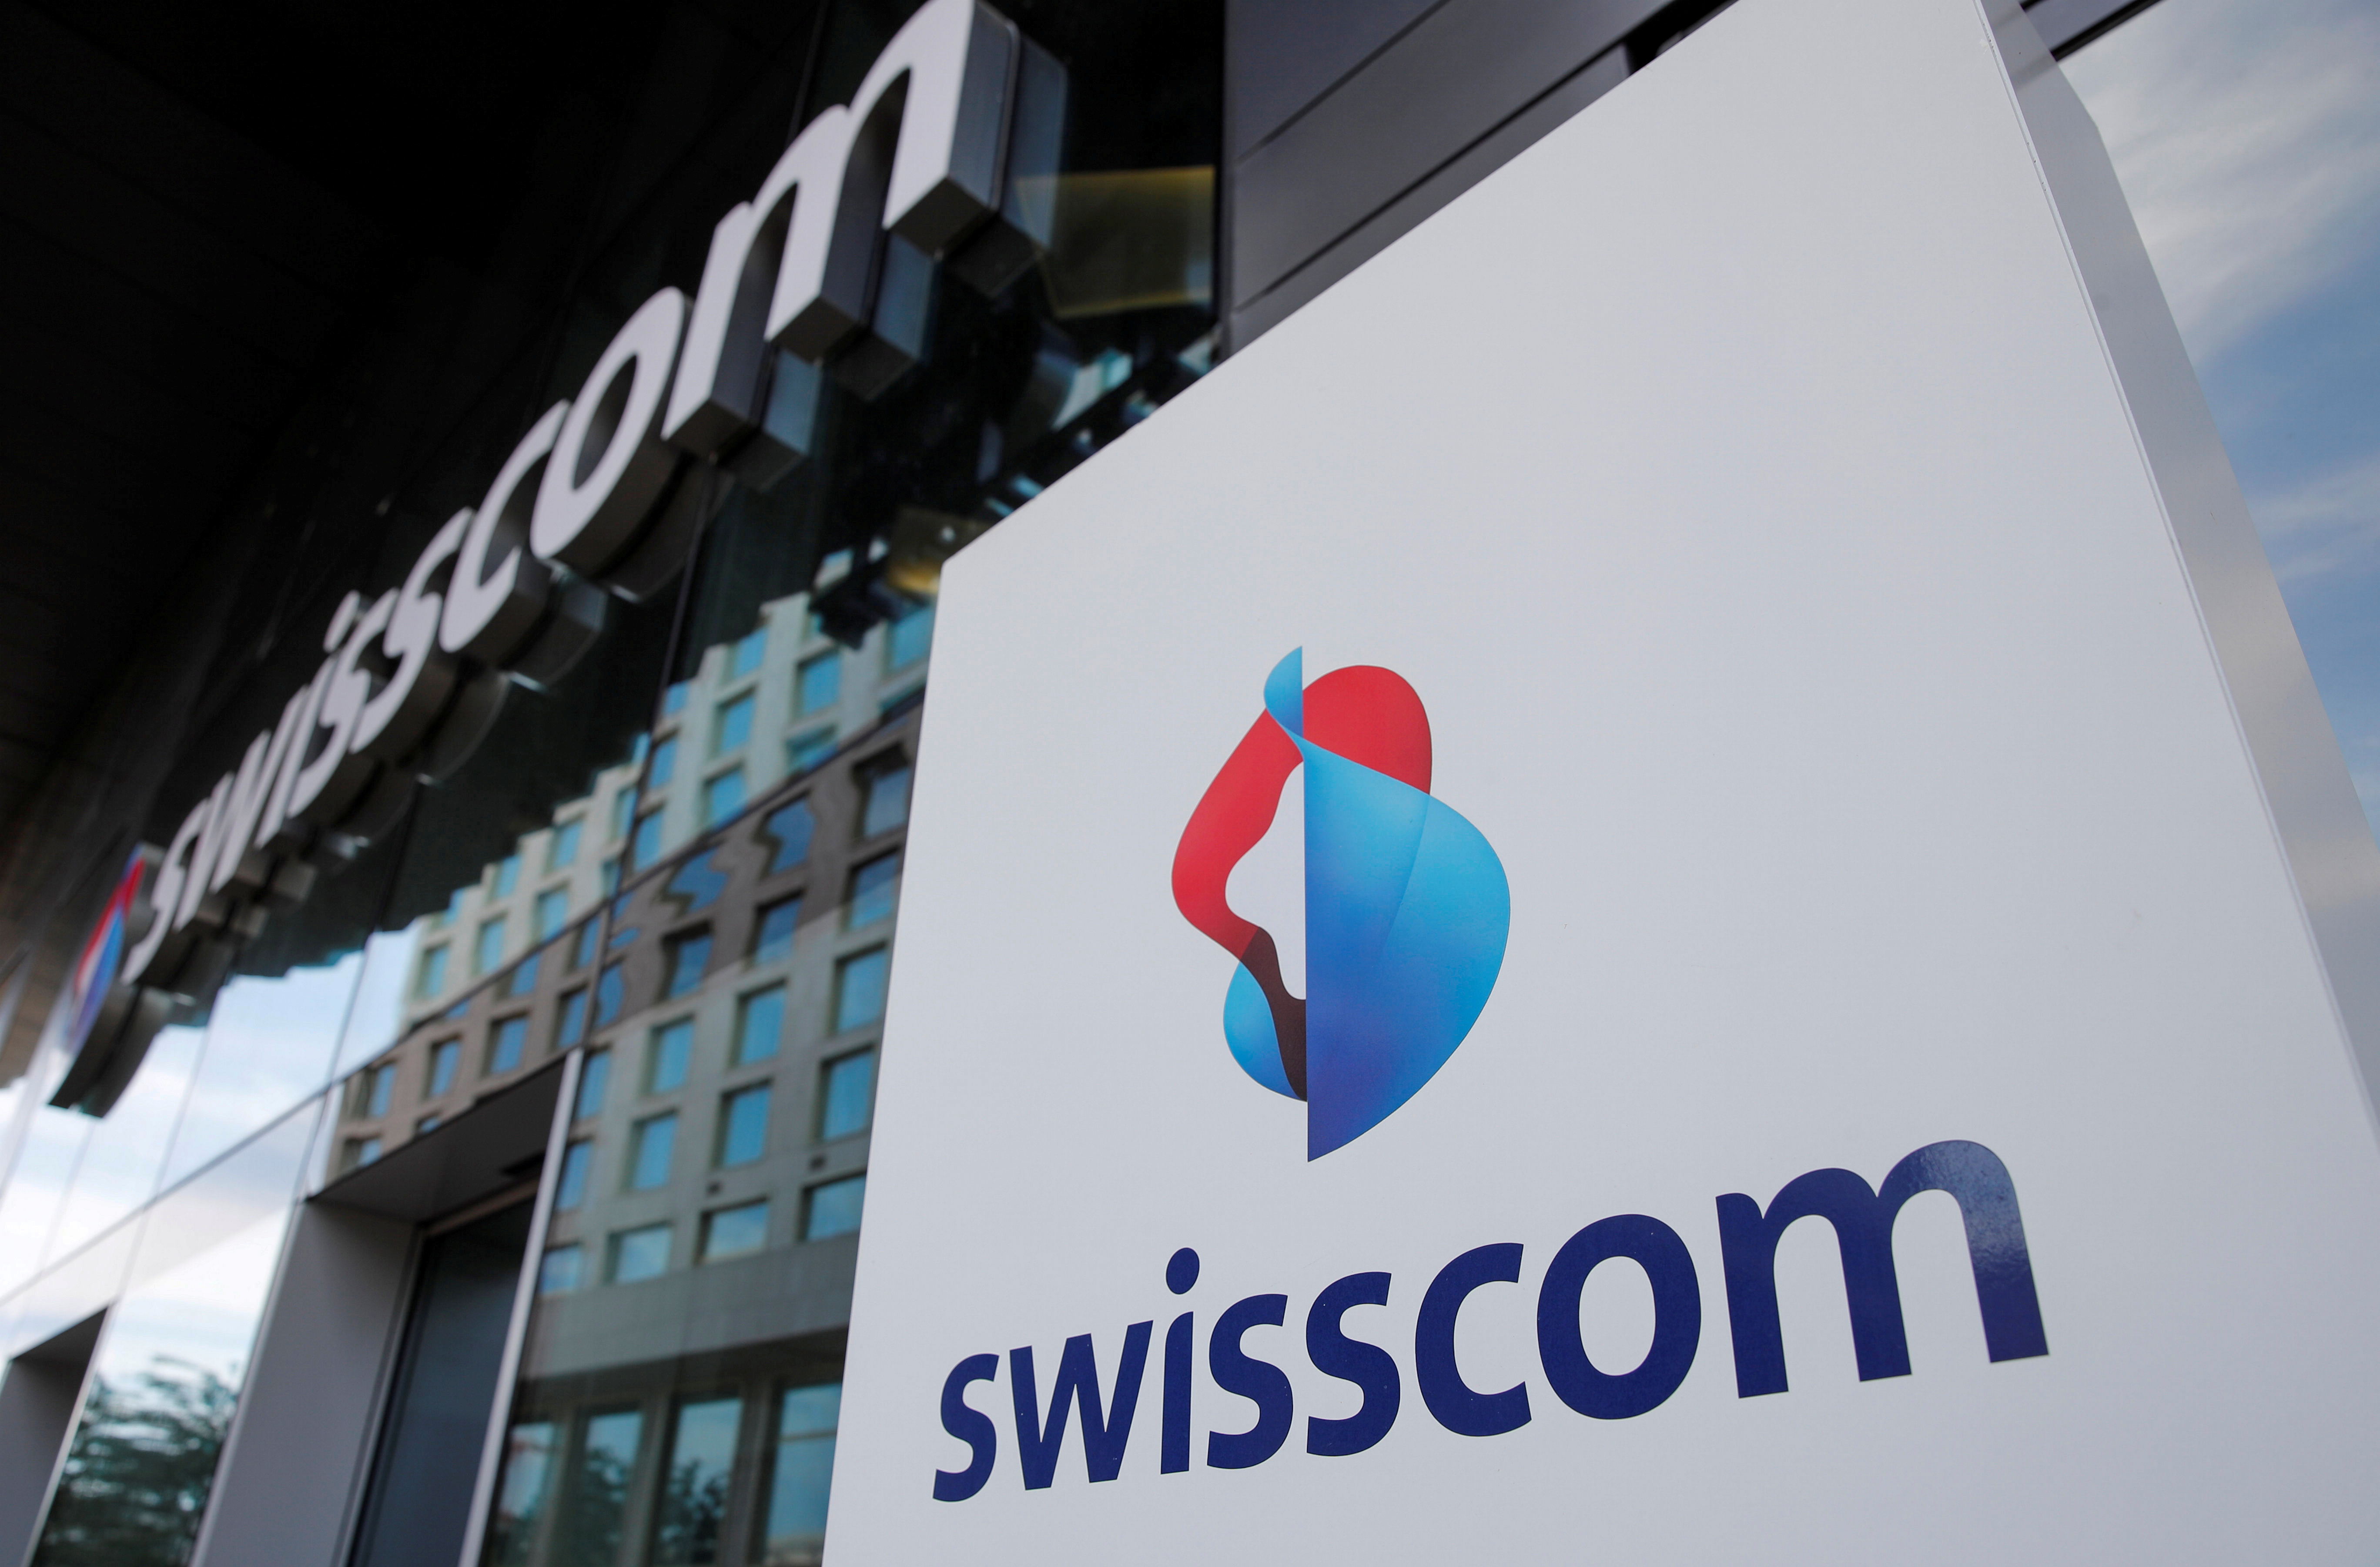 The logo of Swiss telecoms group Swisscom is seen at an office building, in Zurich